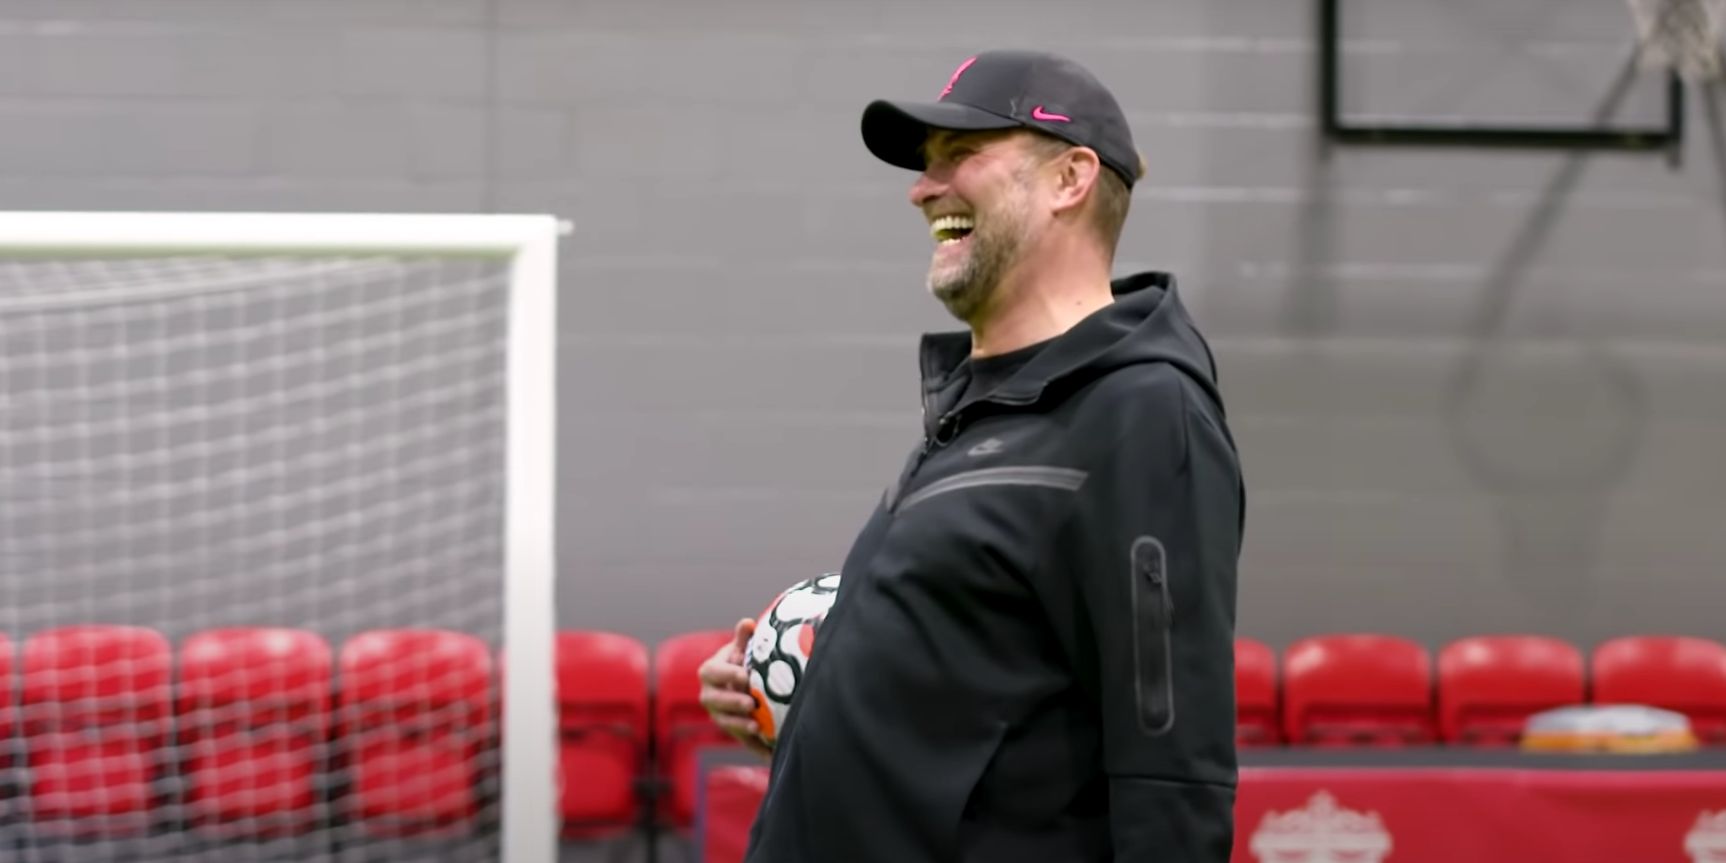 (Video) “500 in a row” – Jurgen Klopp backs Nat Phillips to score 500 goals from close range during coaching drill